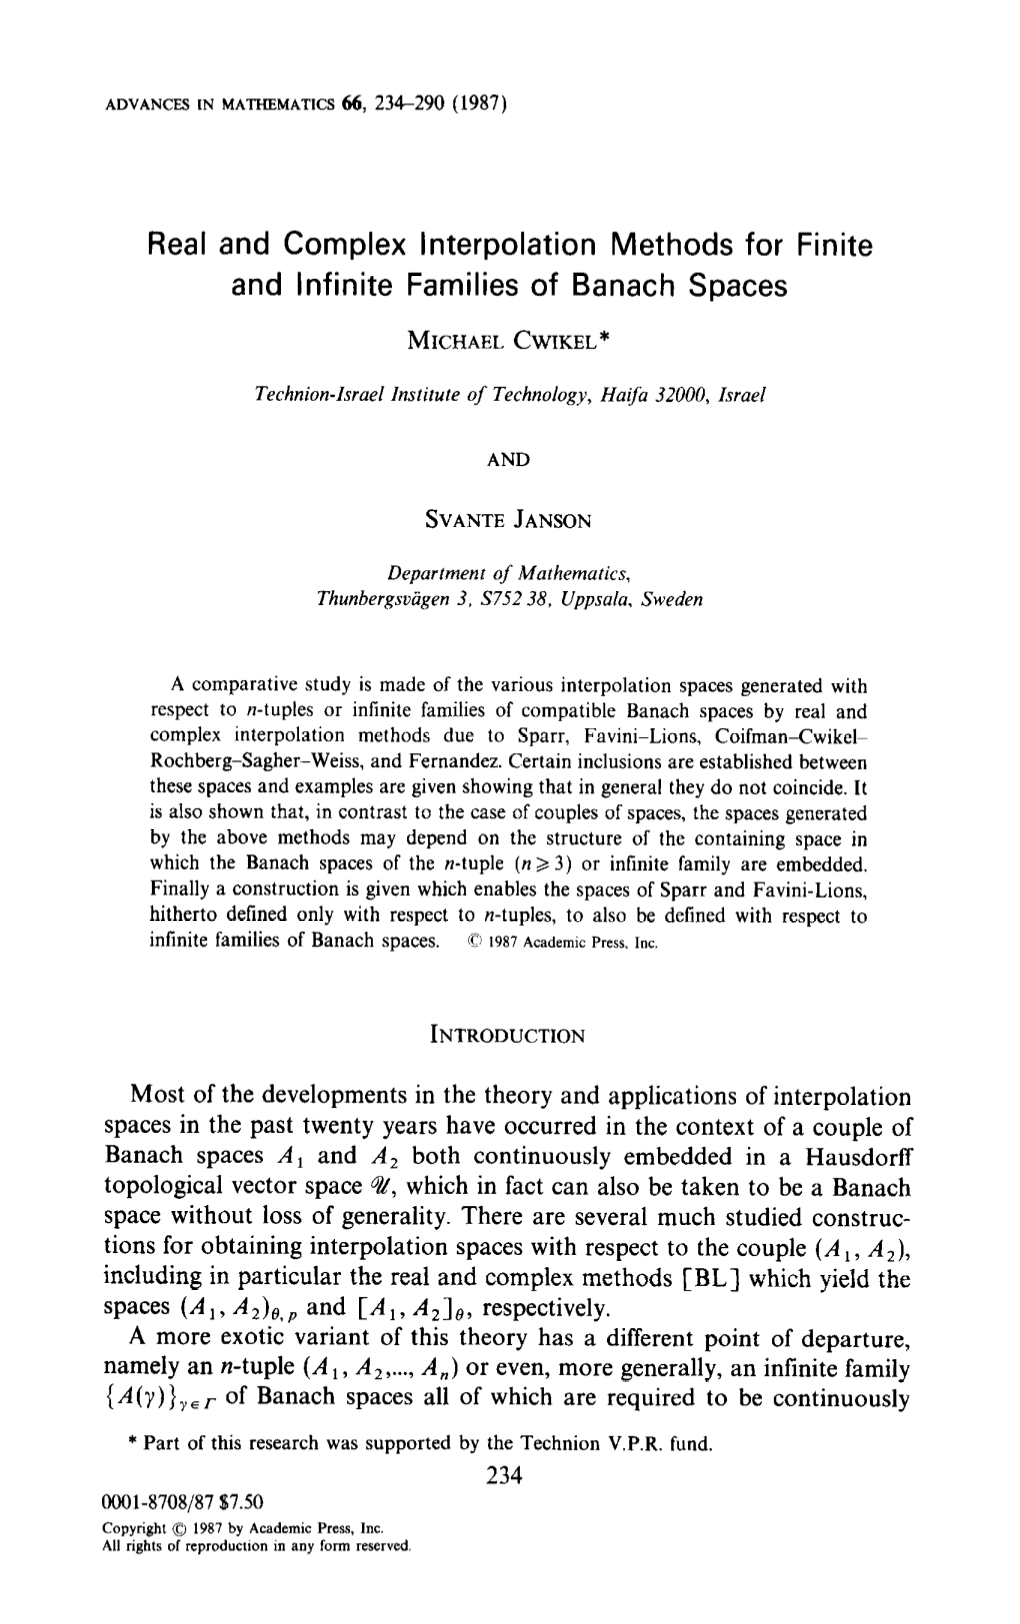 Real and Complex Interpolation Methods for Finite and Infinite Families of Banach Spaces